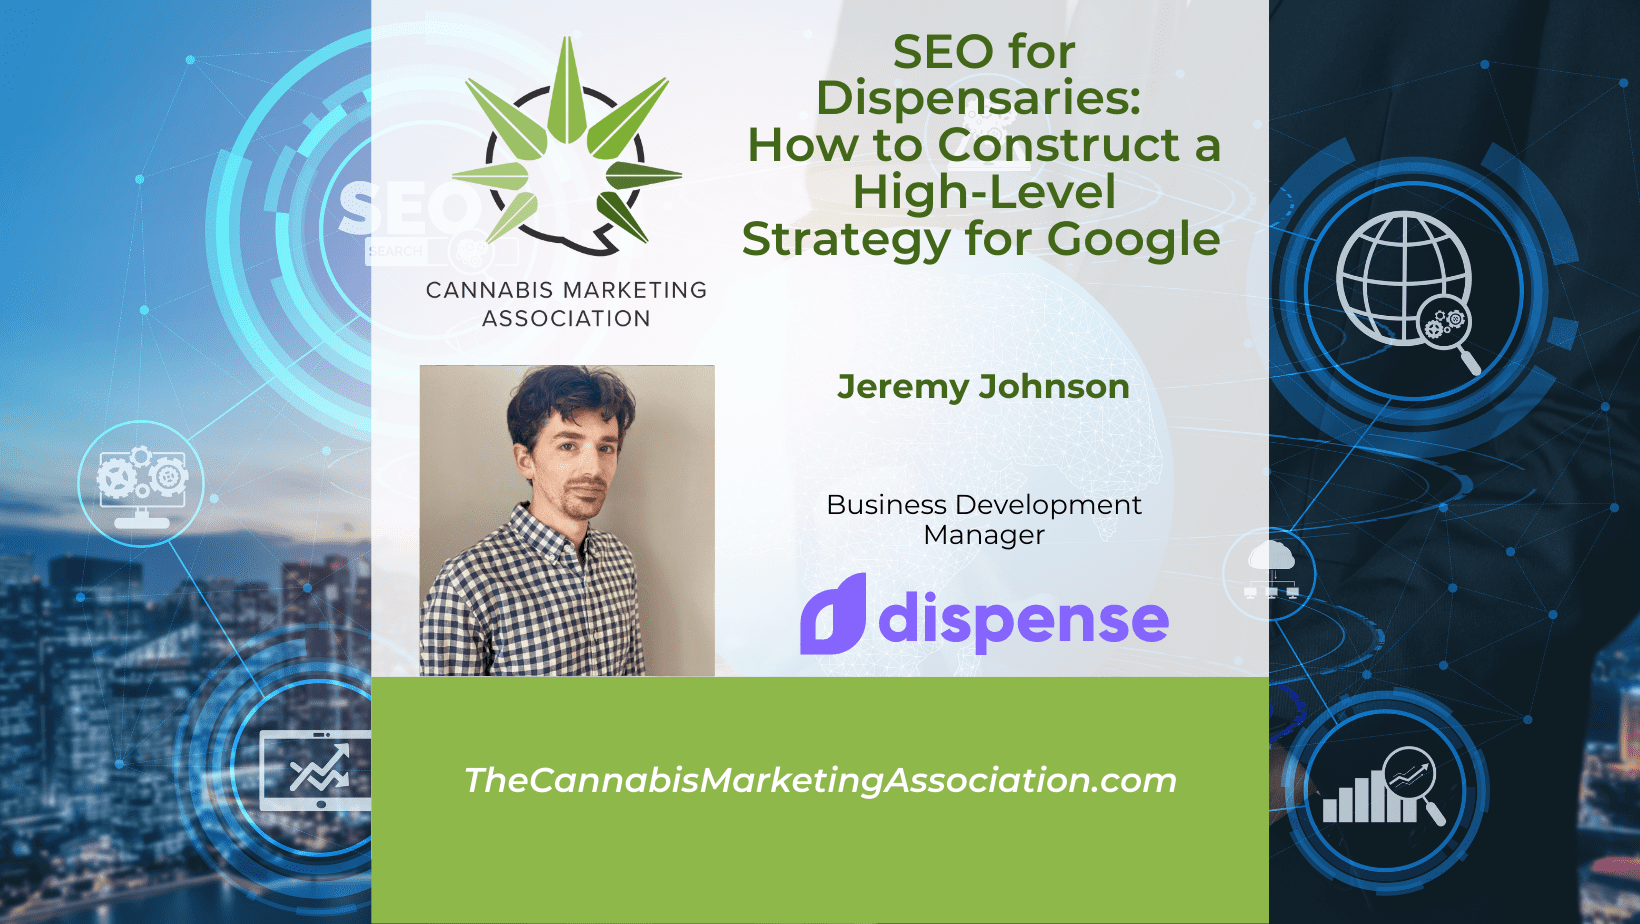 SEO for Dispensaries  How to Construct a High-Level Strategy for Google